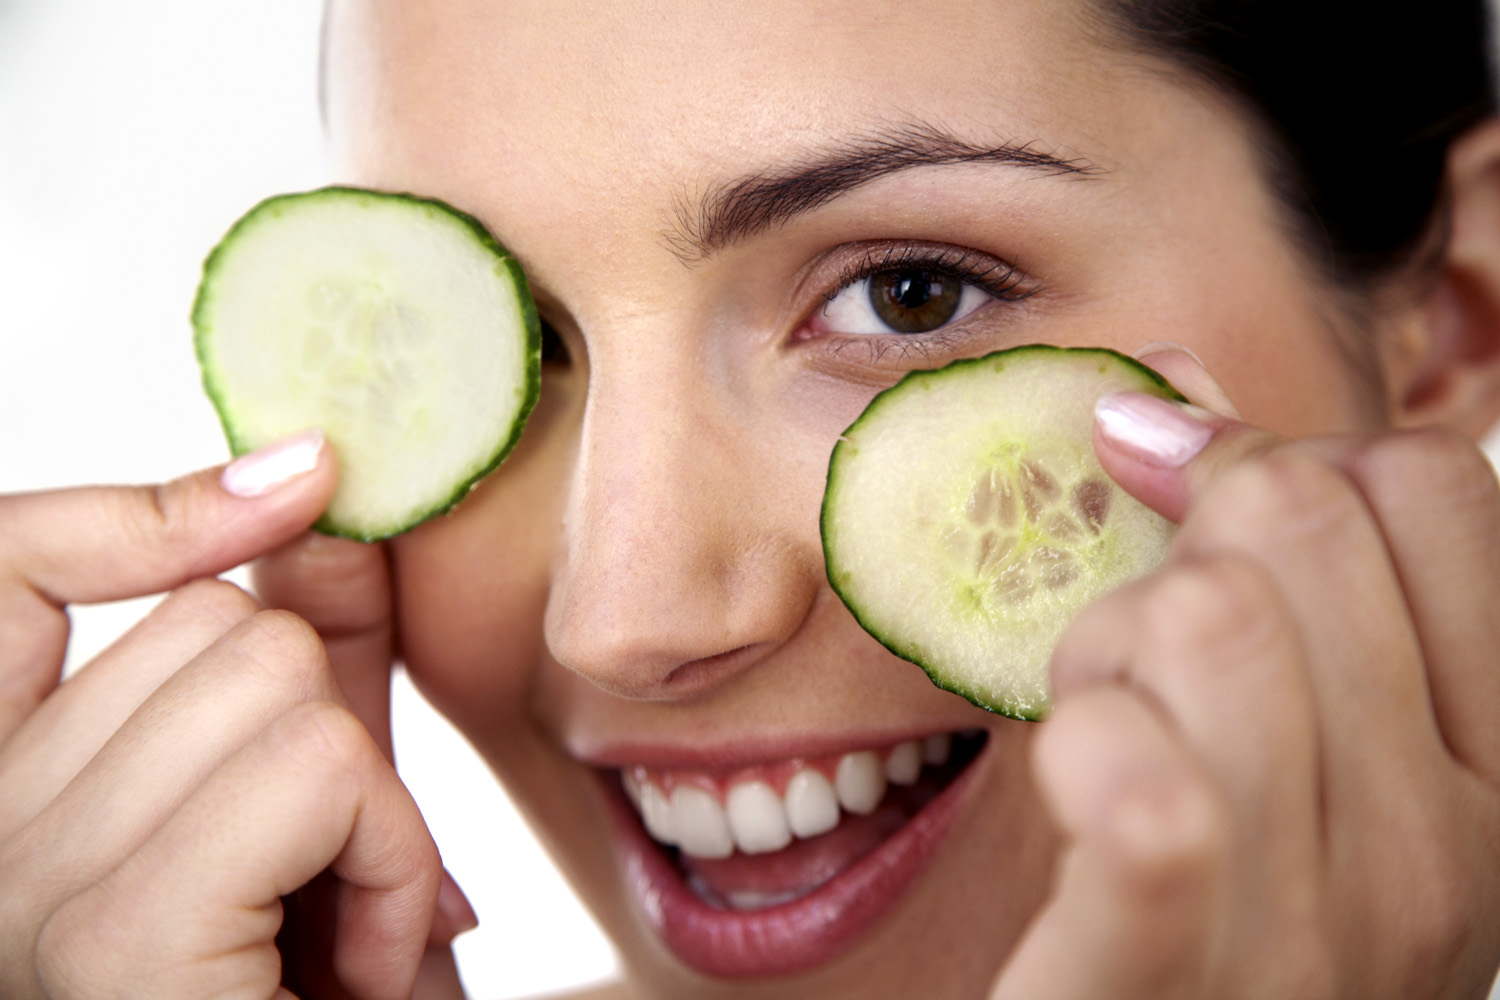 Woman Holding Cucumber Slices over Eyes